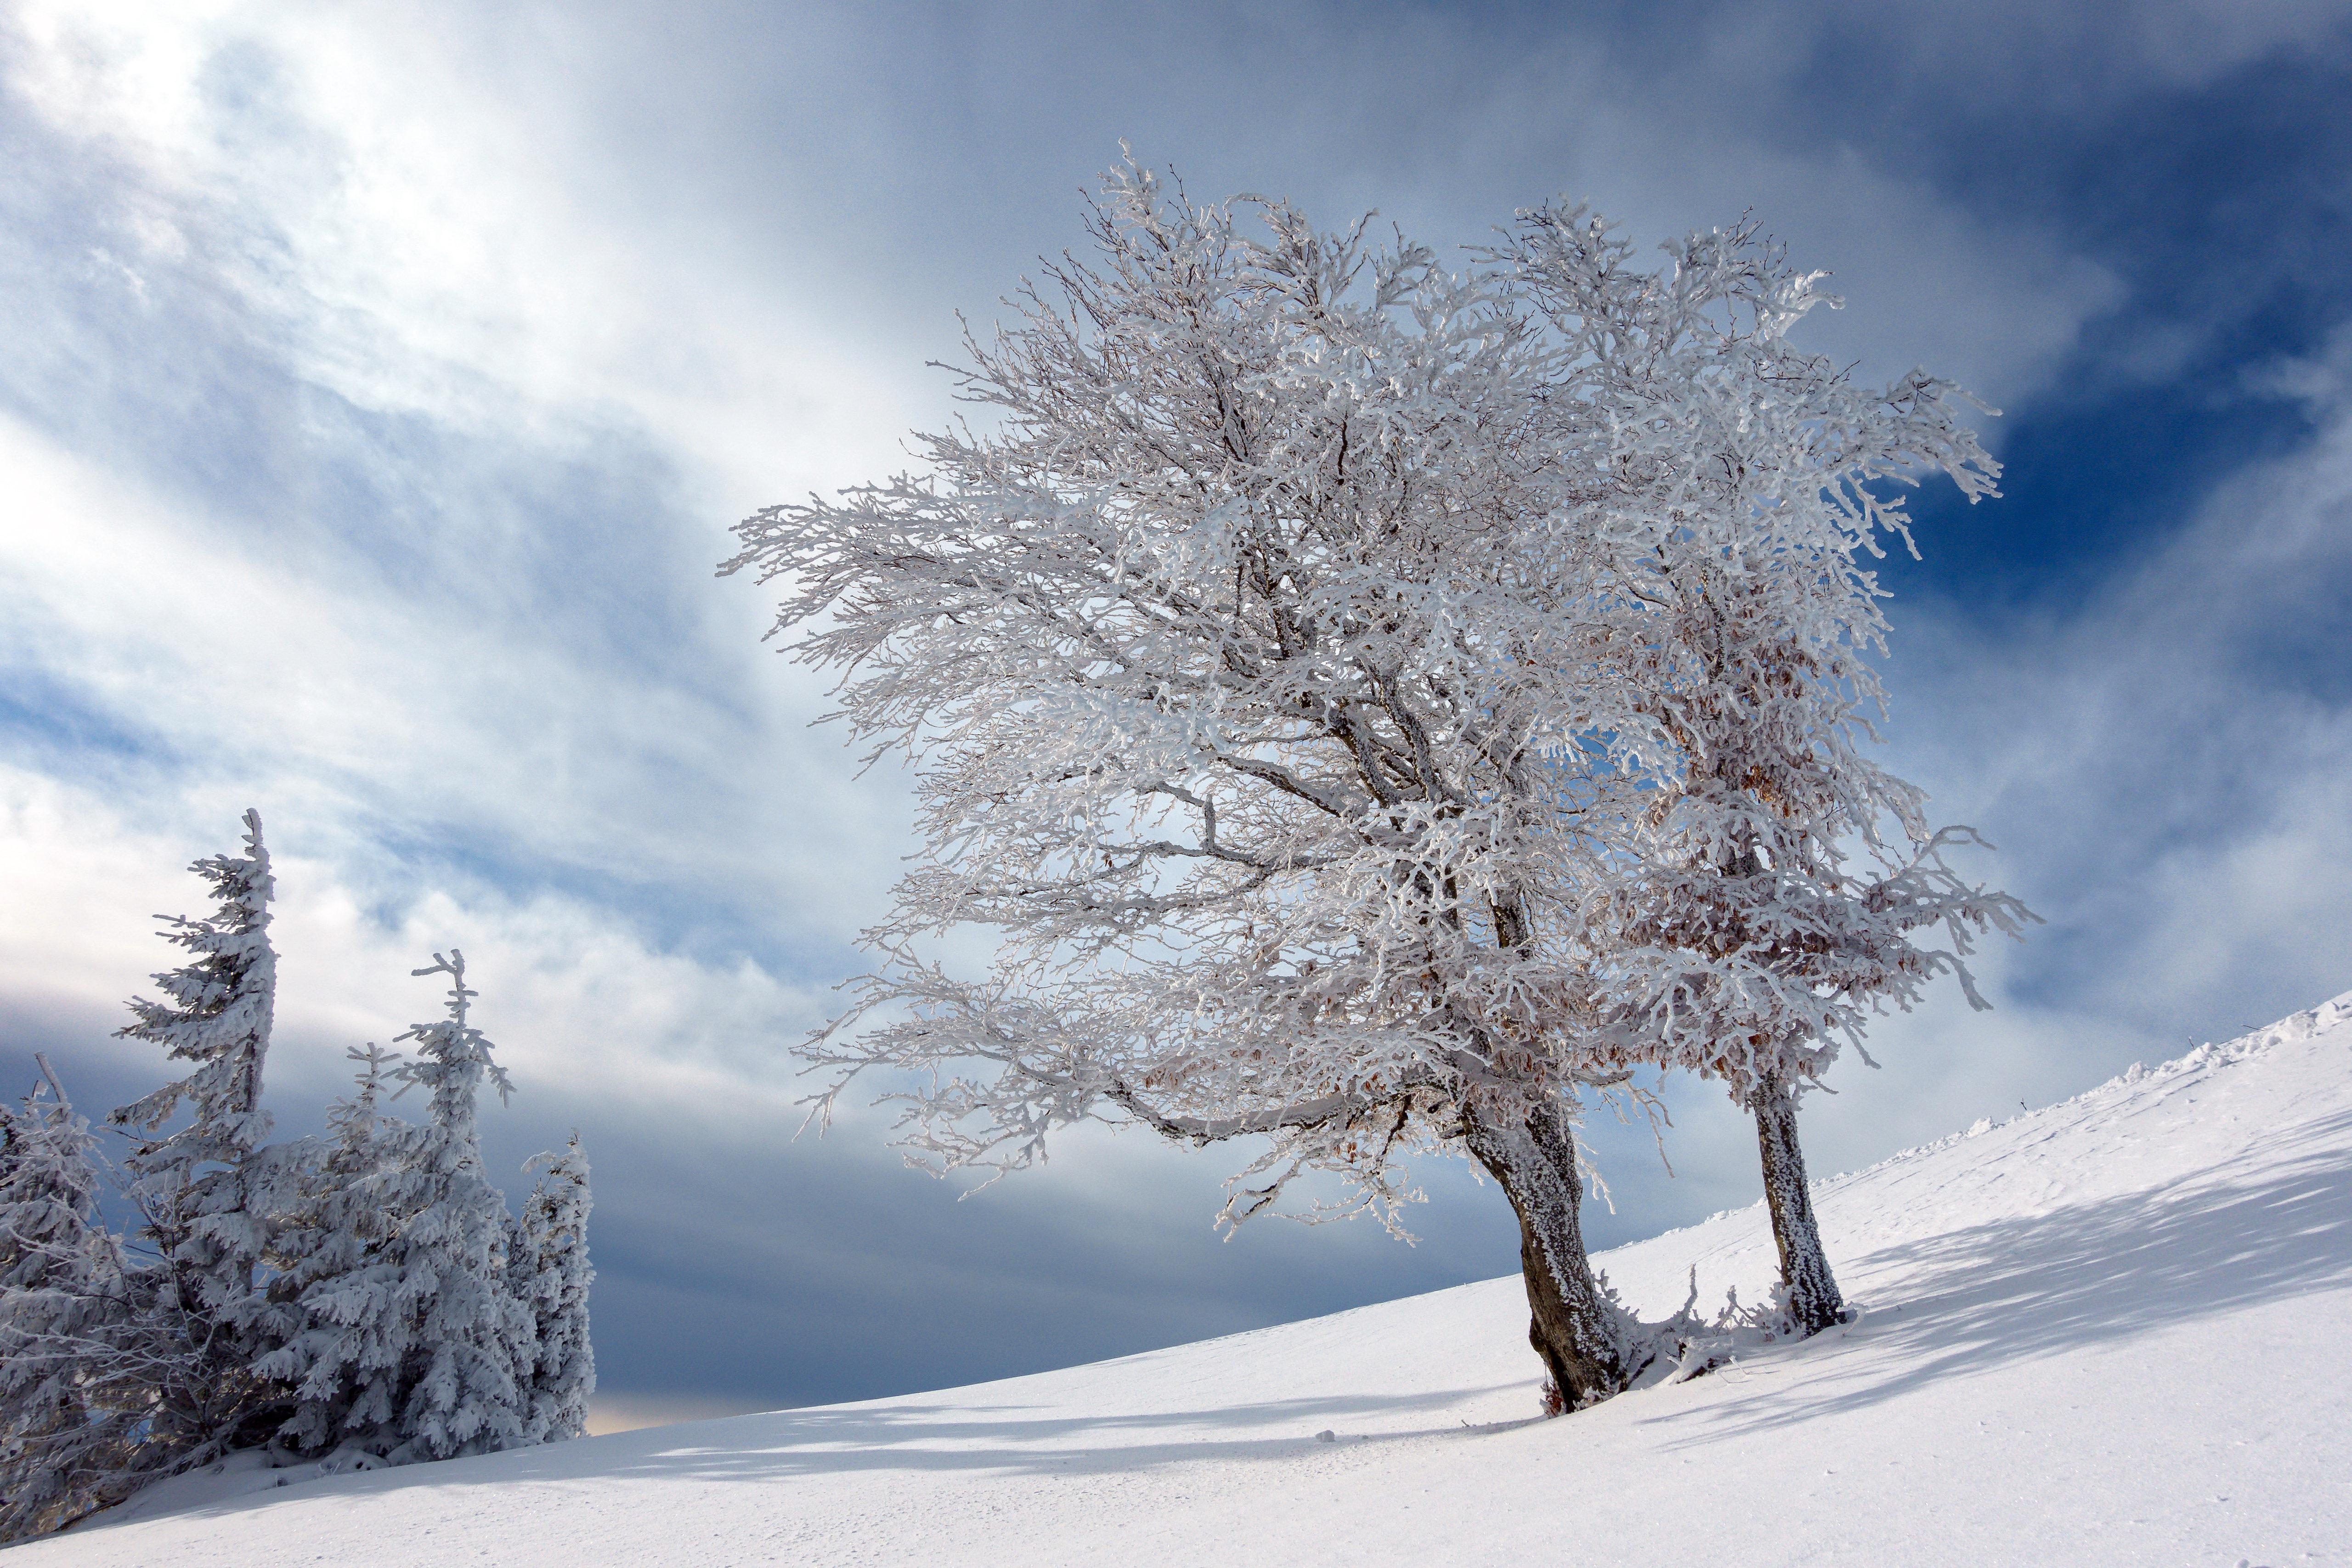 General 5120x3414 winter outdoors nature cold frost ice snow trees